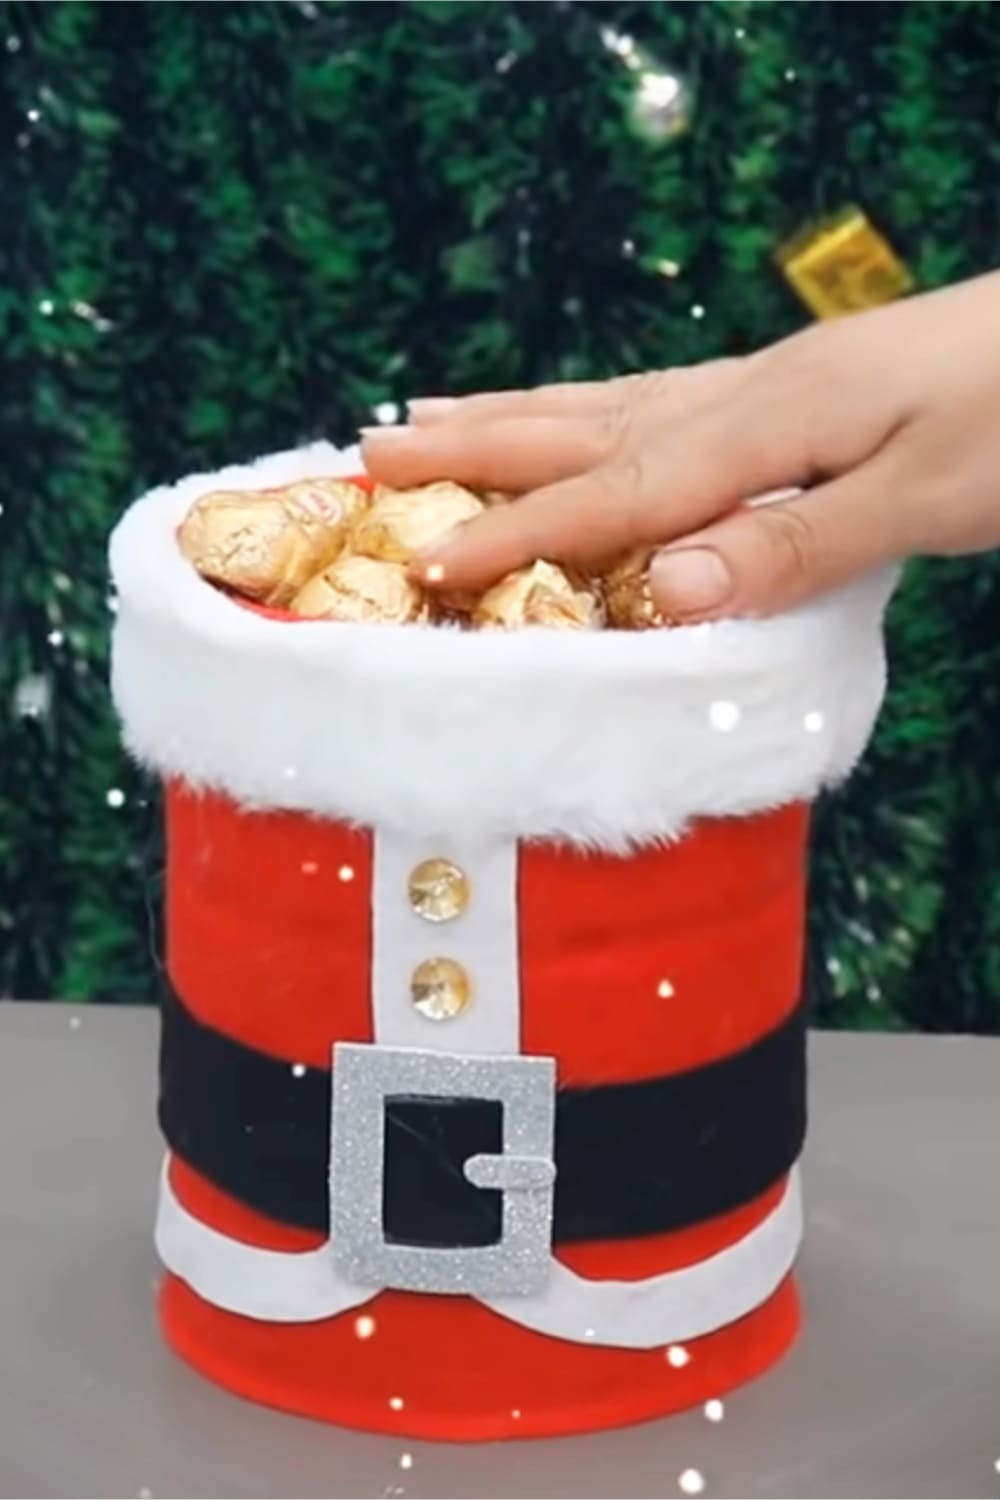 Christmas crafts for adults-simple Christmas craft ideas for adults to make - like this DIY Santa bucket made from a coffee can - what a cute way to give a handmade gift this Christmas